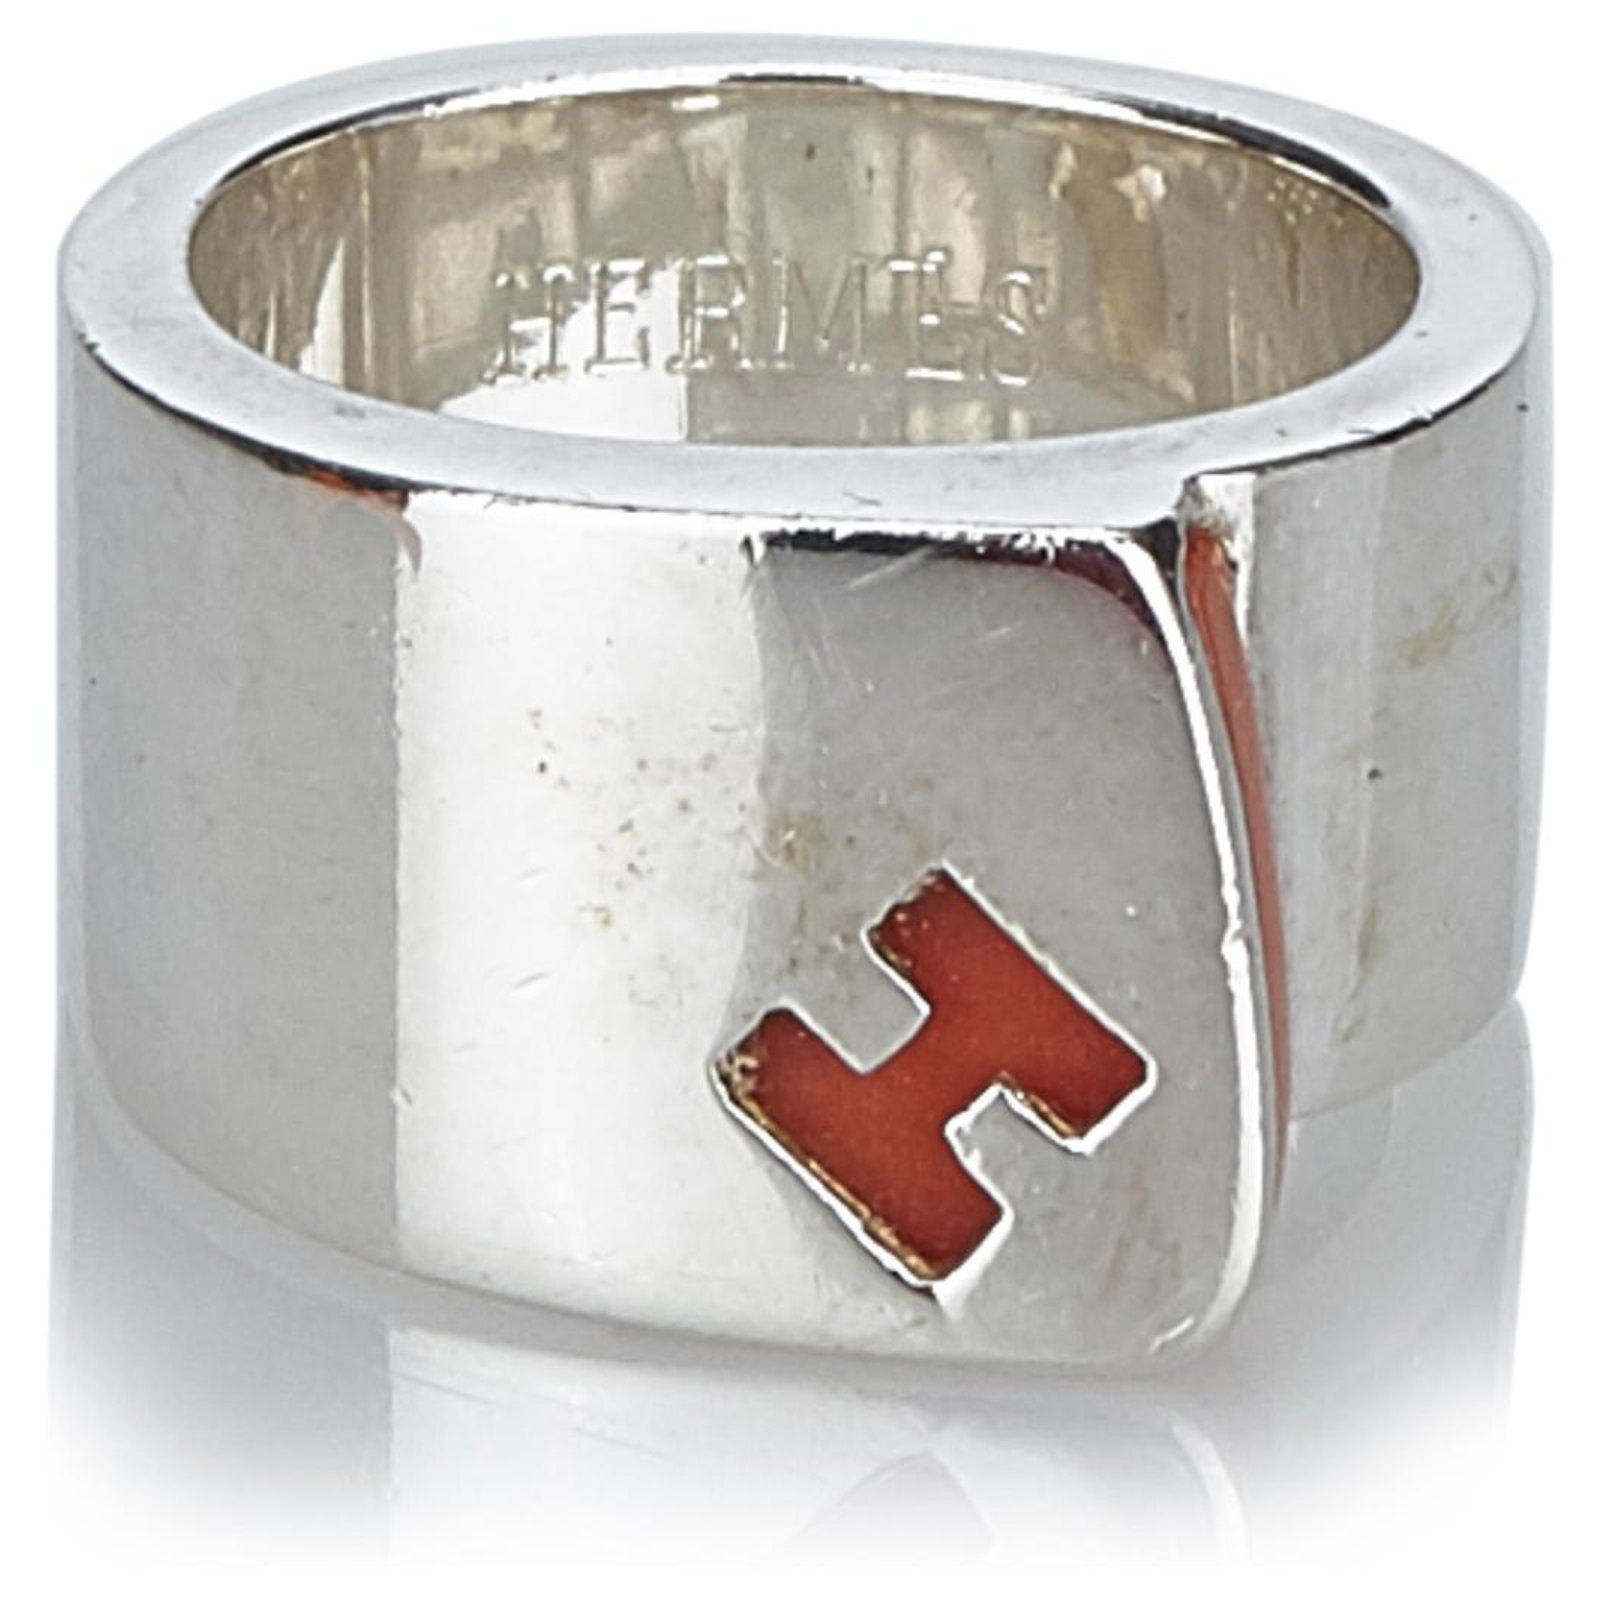 Hermes Rings Best Sale, UP TO 50% OFF | www.editorialelpirata.com